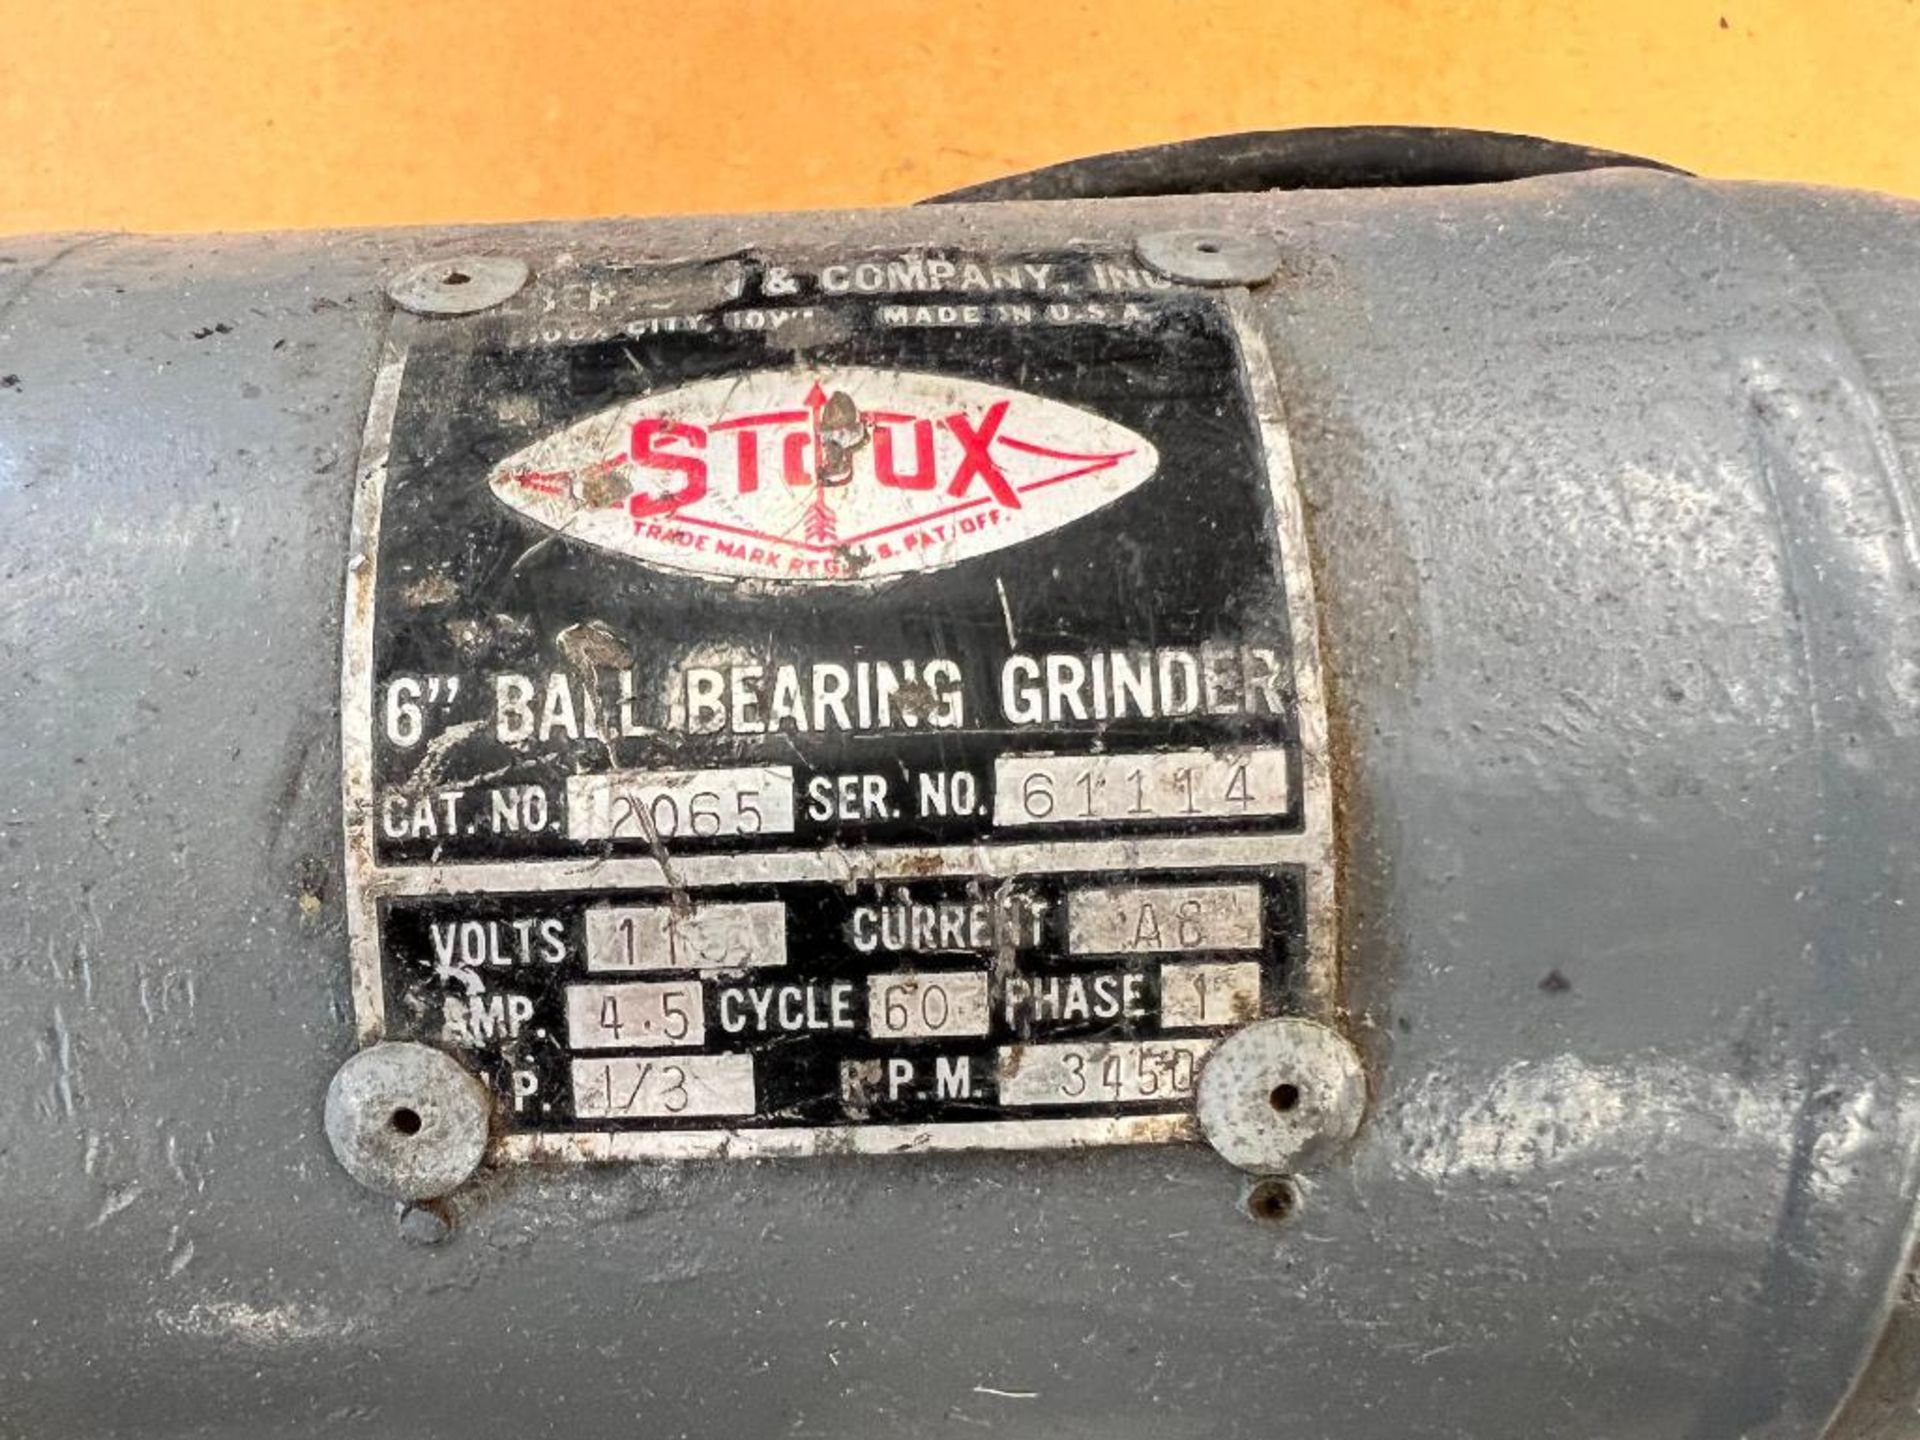 SIOUX 6" BALL BEARING GRINDER, CAT. NO. 2065, S/N 61114, SINGLE PHASE, 1/3 HP - Image 3 of 3